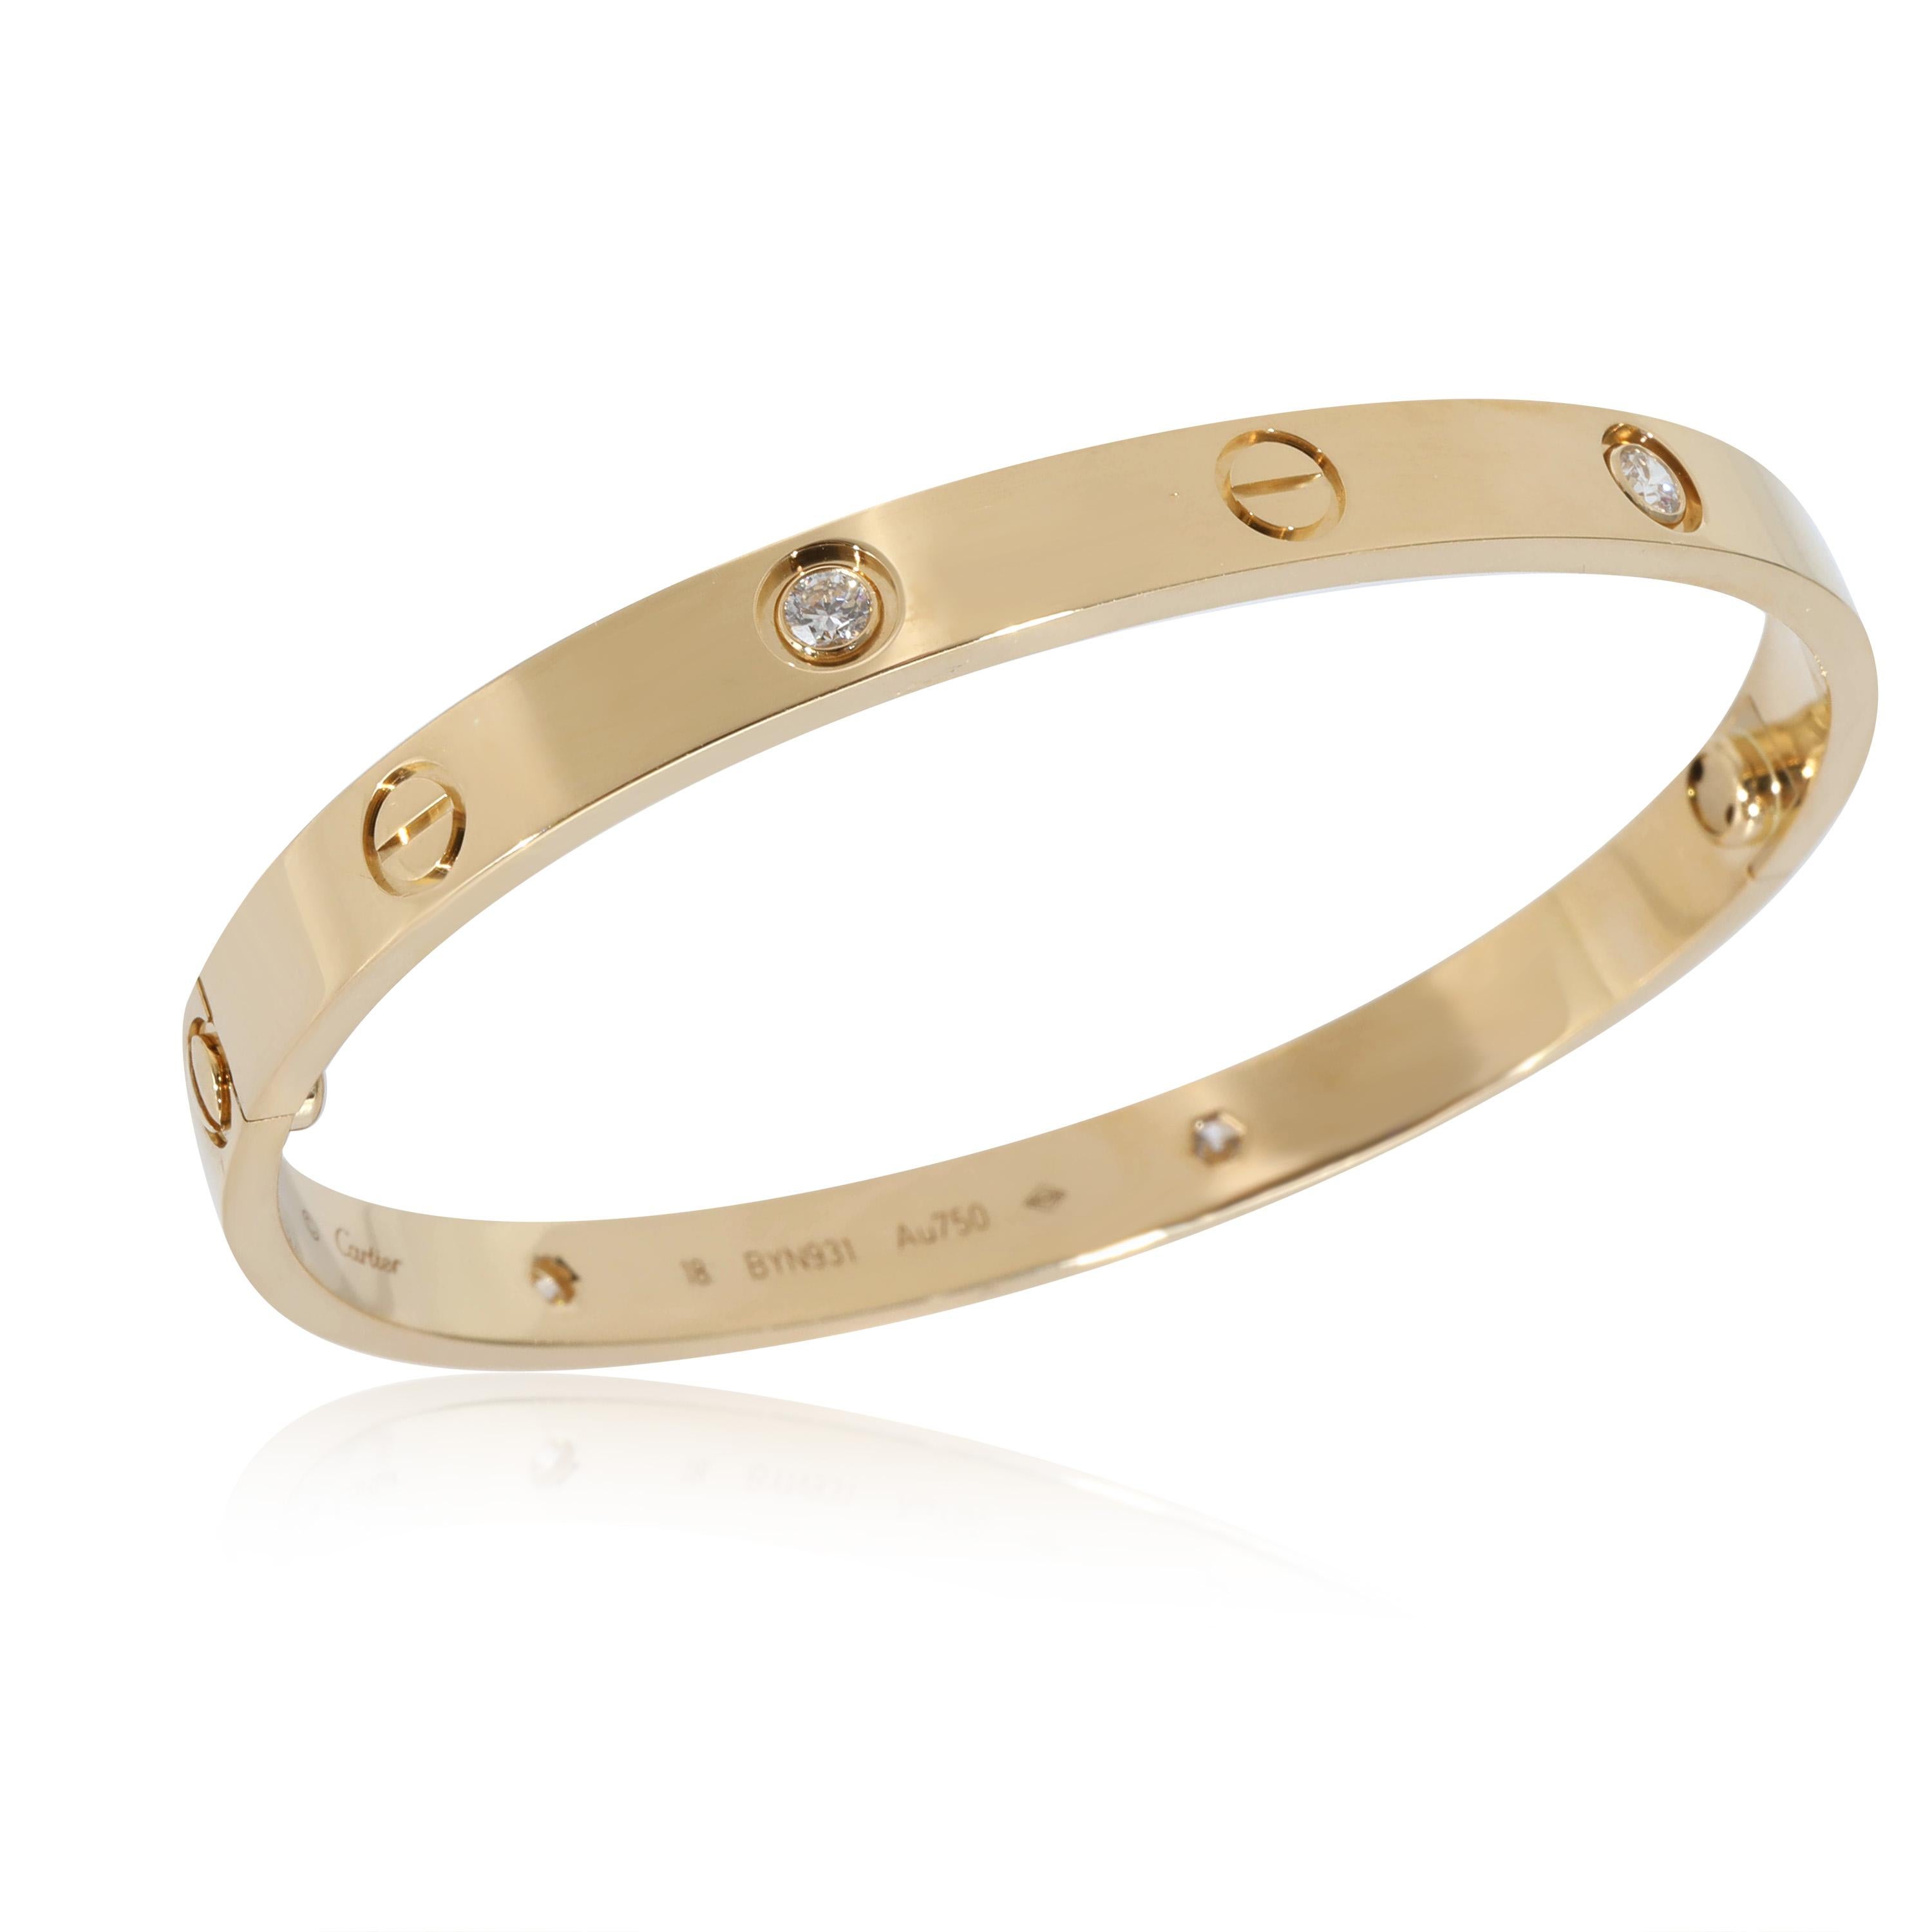 Cartier Love Diamond Bracelet in 18k Yellow Gold 0.42 CTW

PRIMARY DETAILS
SKU: 131571
Listing Title: Cartier Love Diamond Bracelet in 18k Yellow Gold 0.42 CTW
Condition Description: Cartier's Love collection is the epitome of iconic, from the